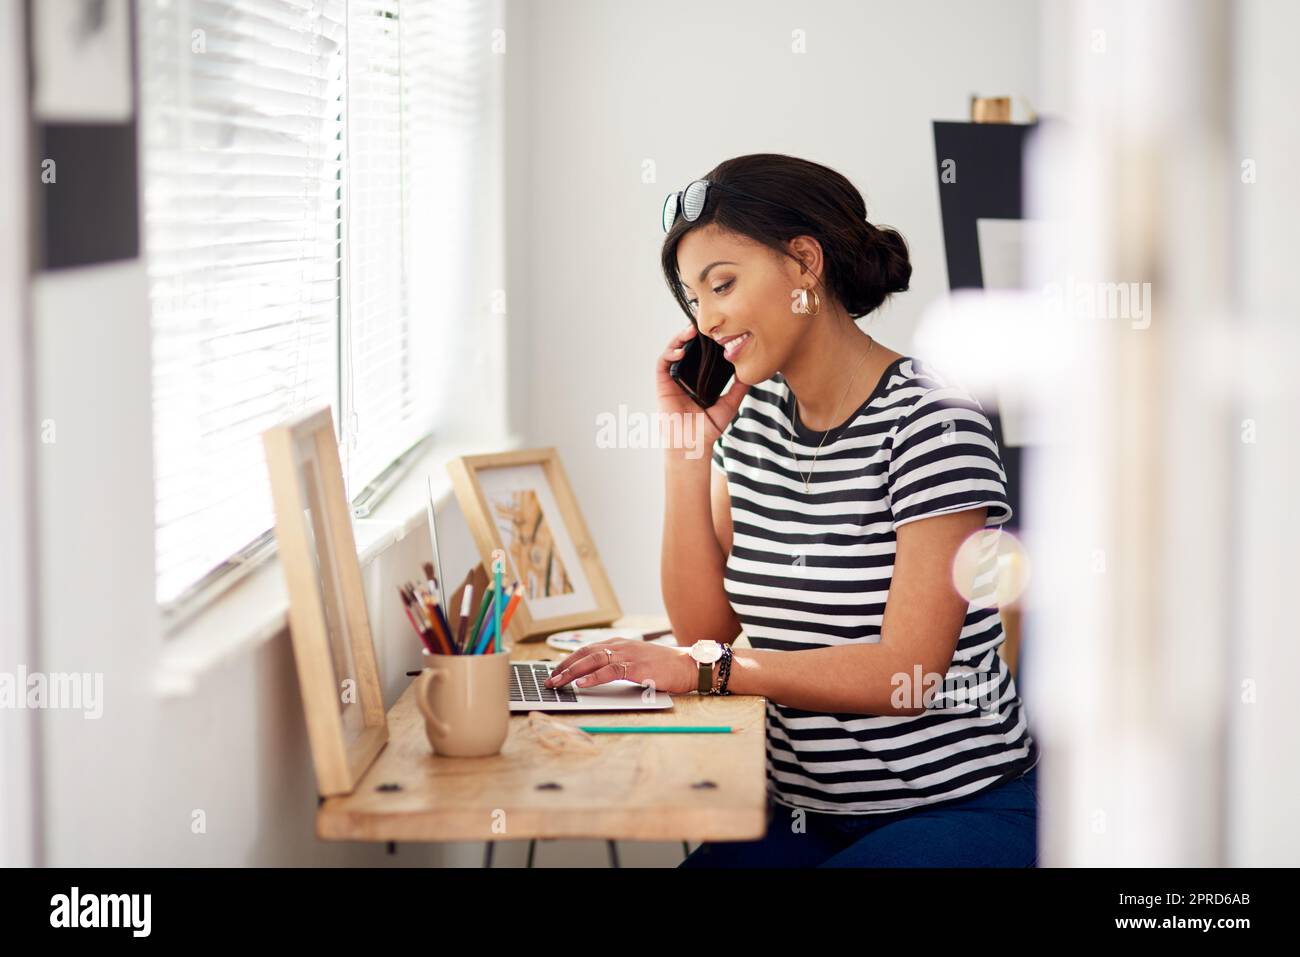 Everyone is calling in to order my work today. an attractive young artist using a laptop and making a phone call inside her studio at home. Stock Photo